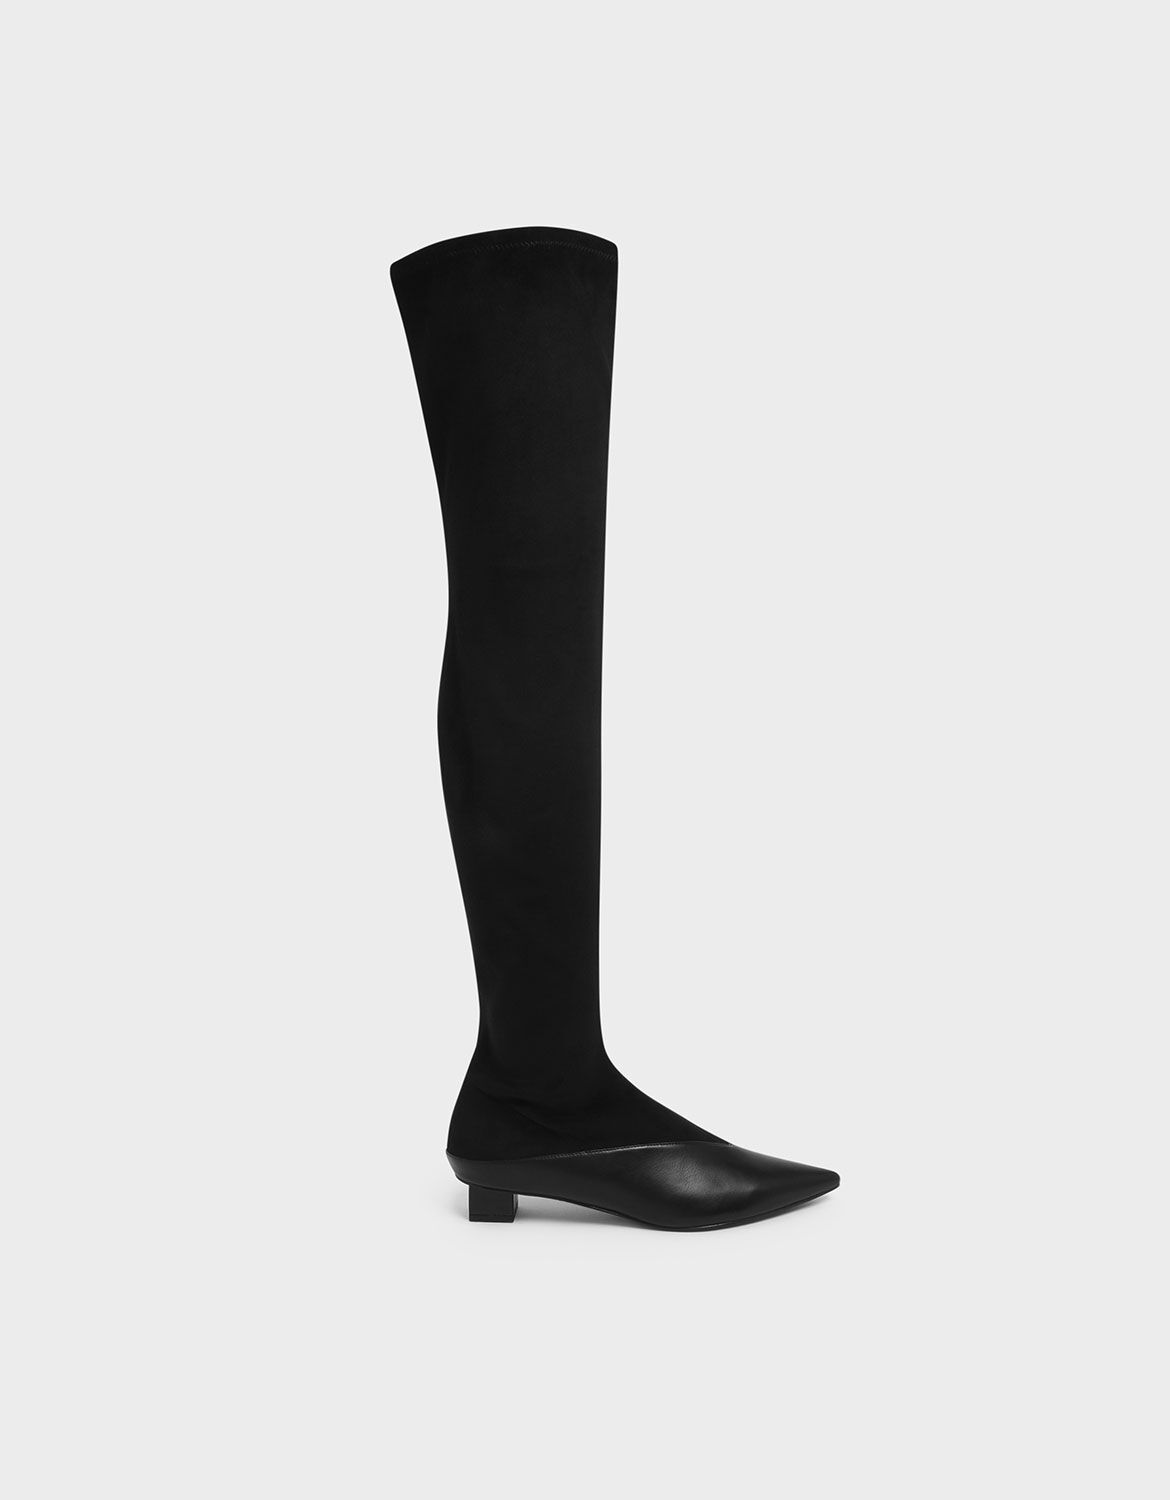 low heel thigh high boots